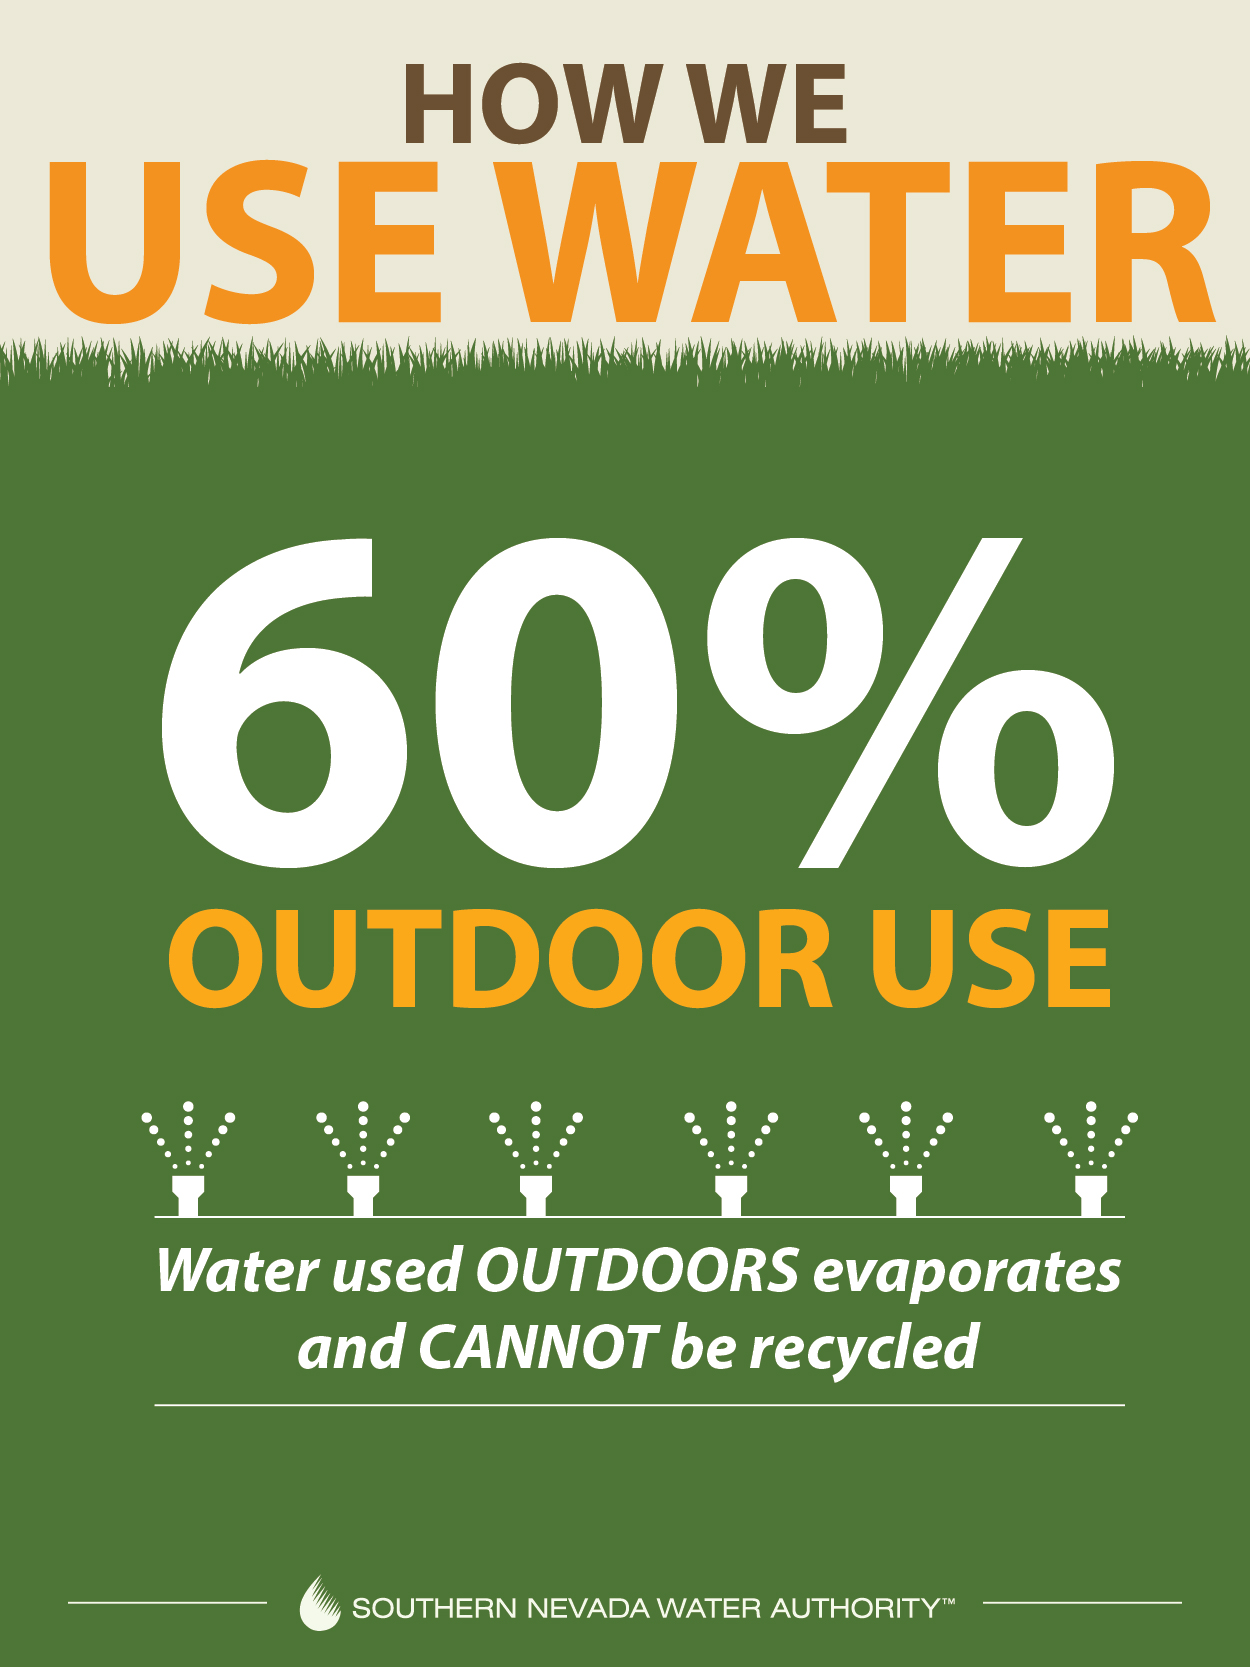 A graphic explaining that 60 percent of water use is outdoors